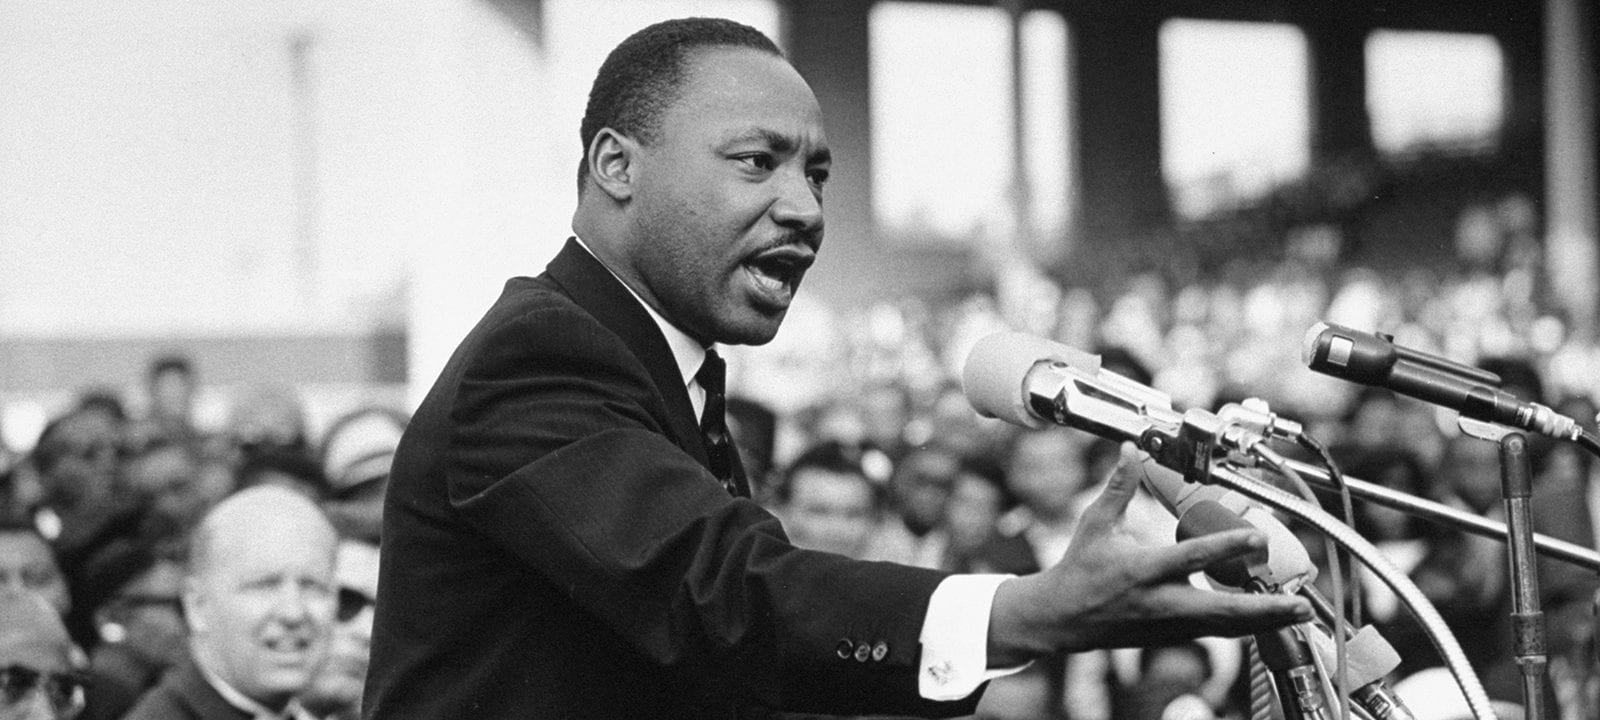 Today We Honor Martin Luther King Jr.